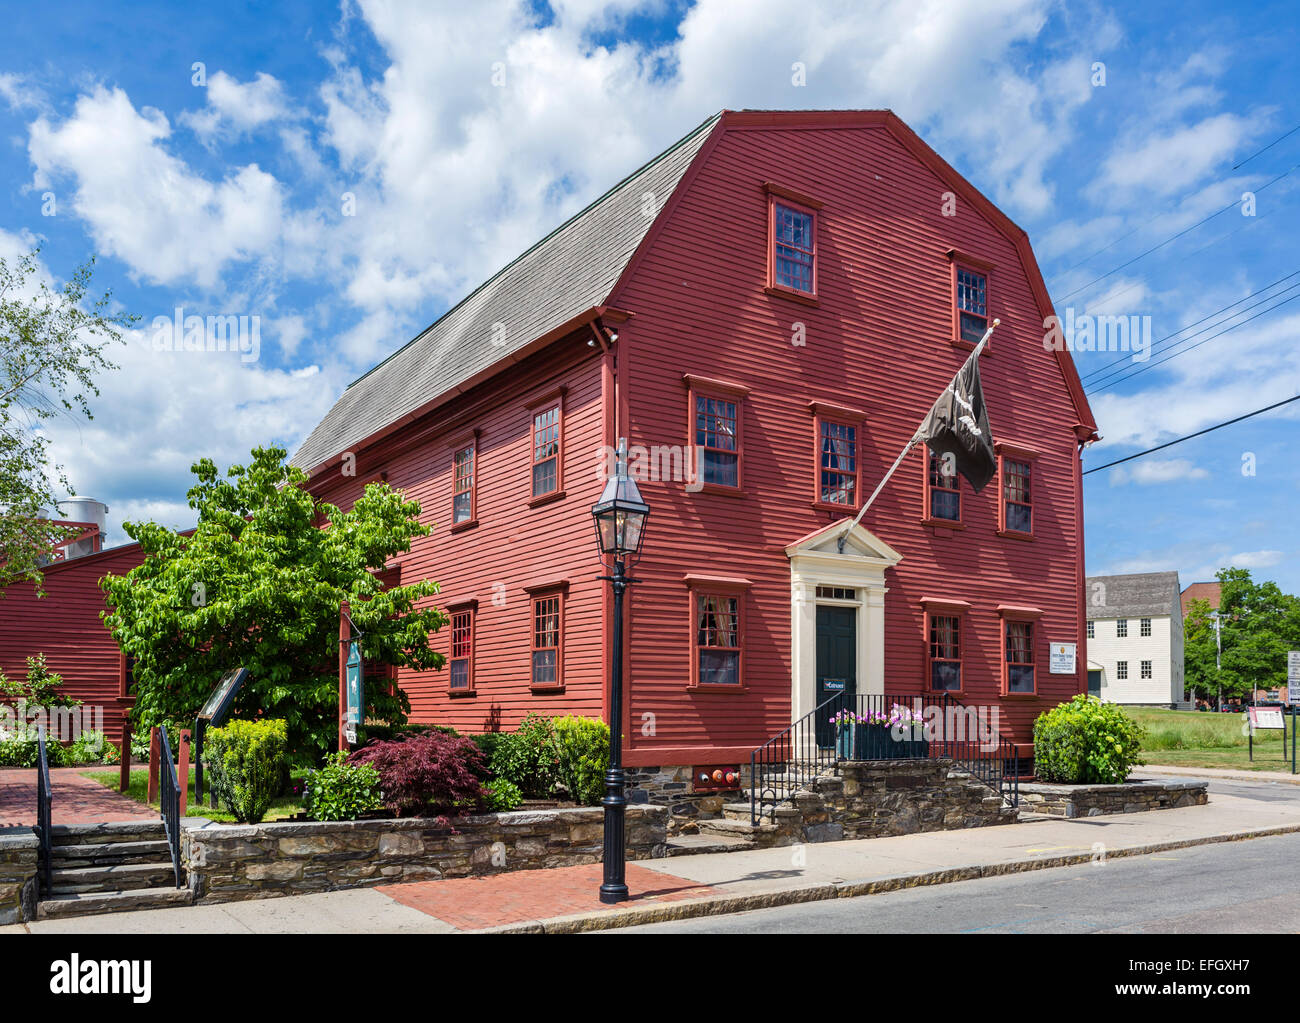 The 17thC White Horse Tavern, one of the oldest tavern buildings in the US, Newport, Rhode Island, USA Stock Photo